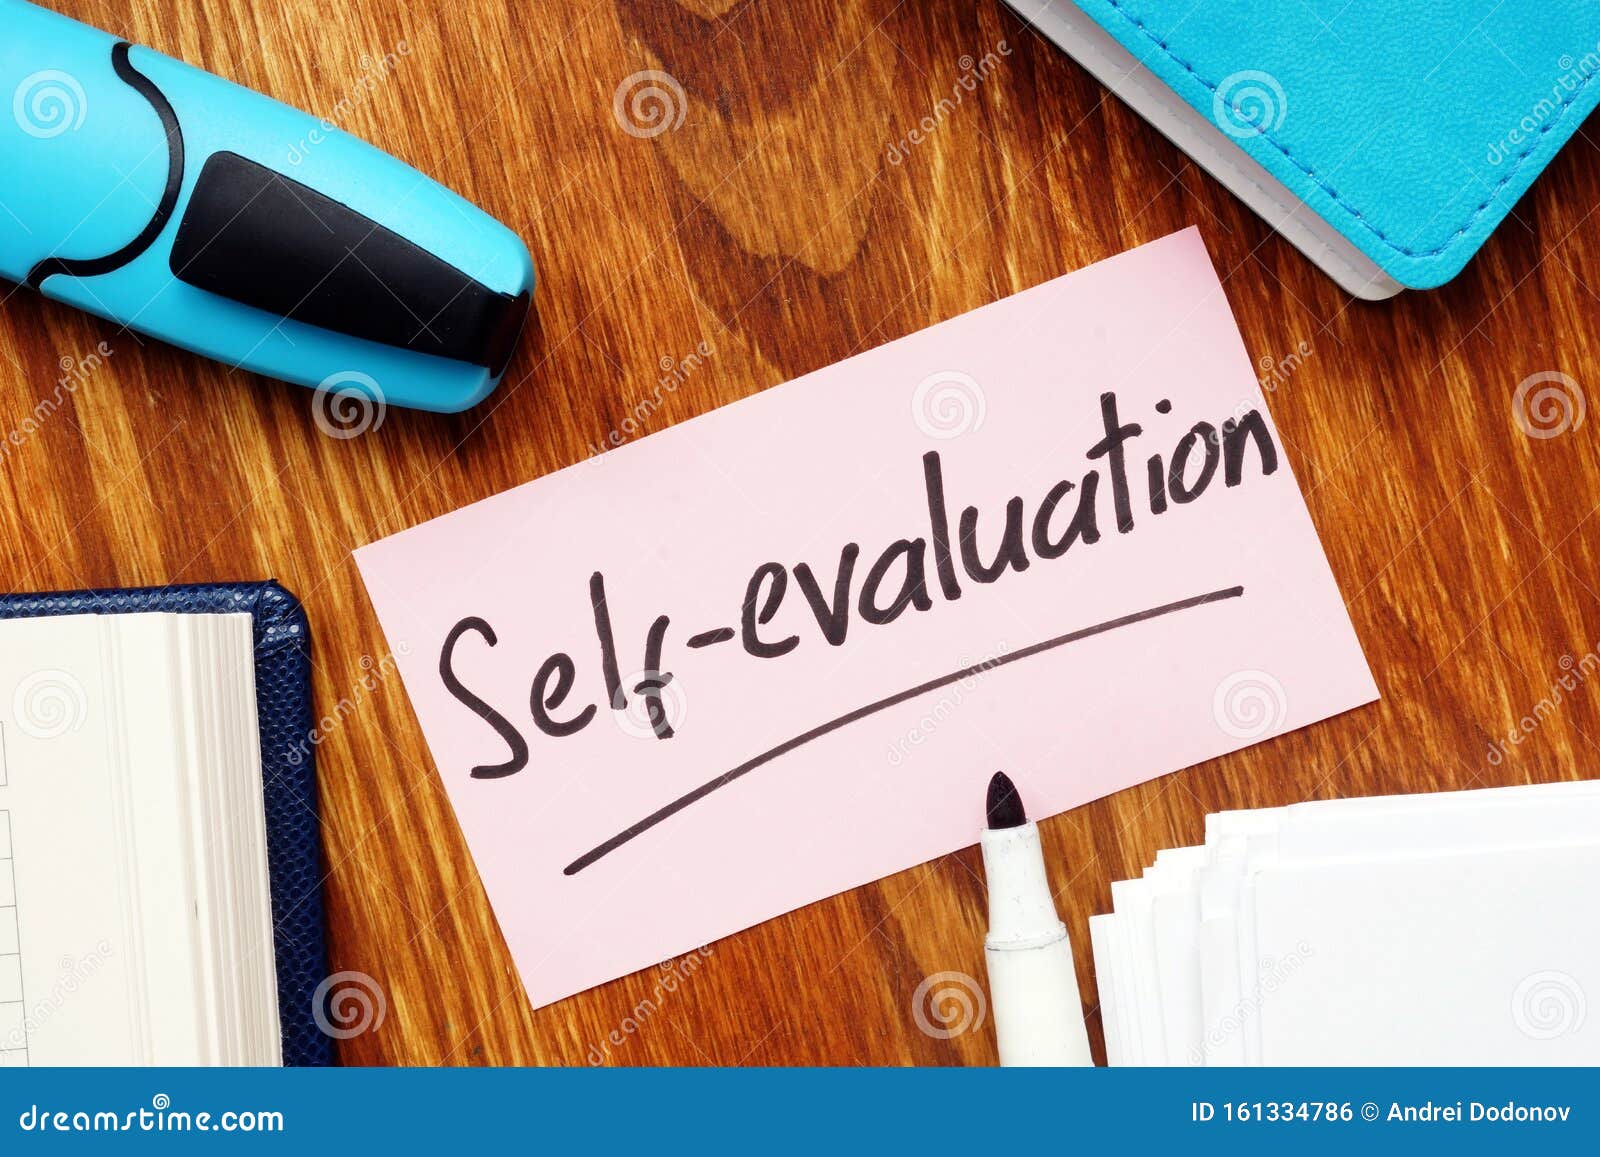 business photo shows hand written text self-evaluation